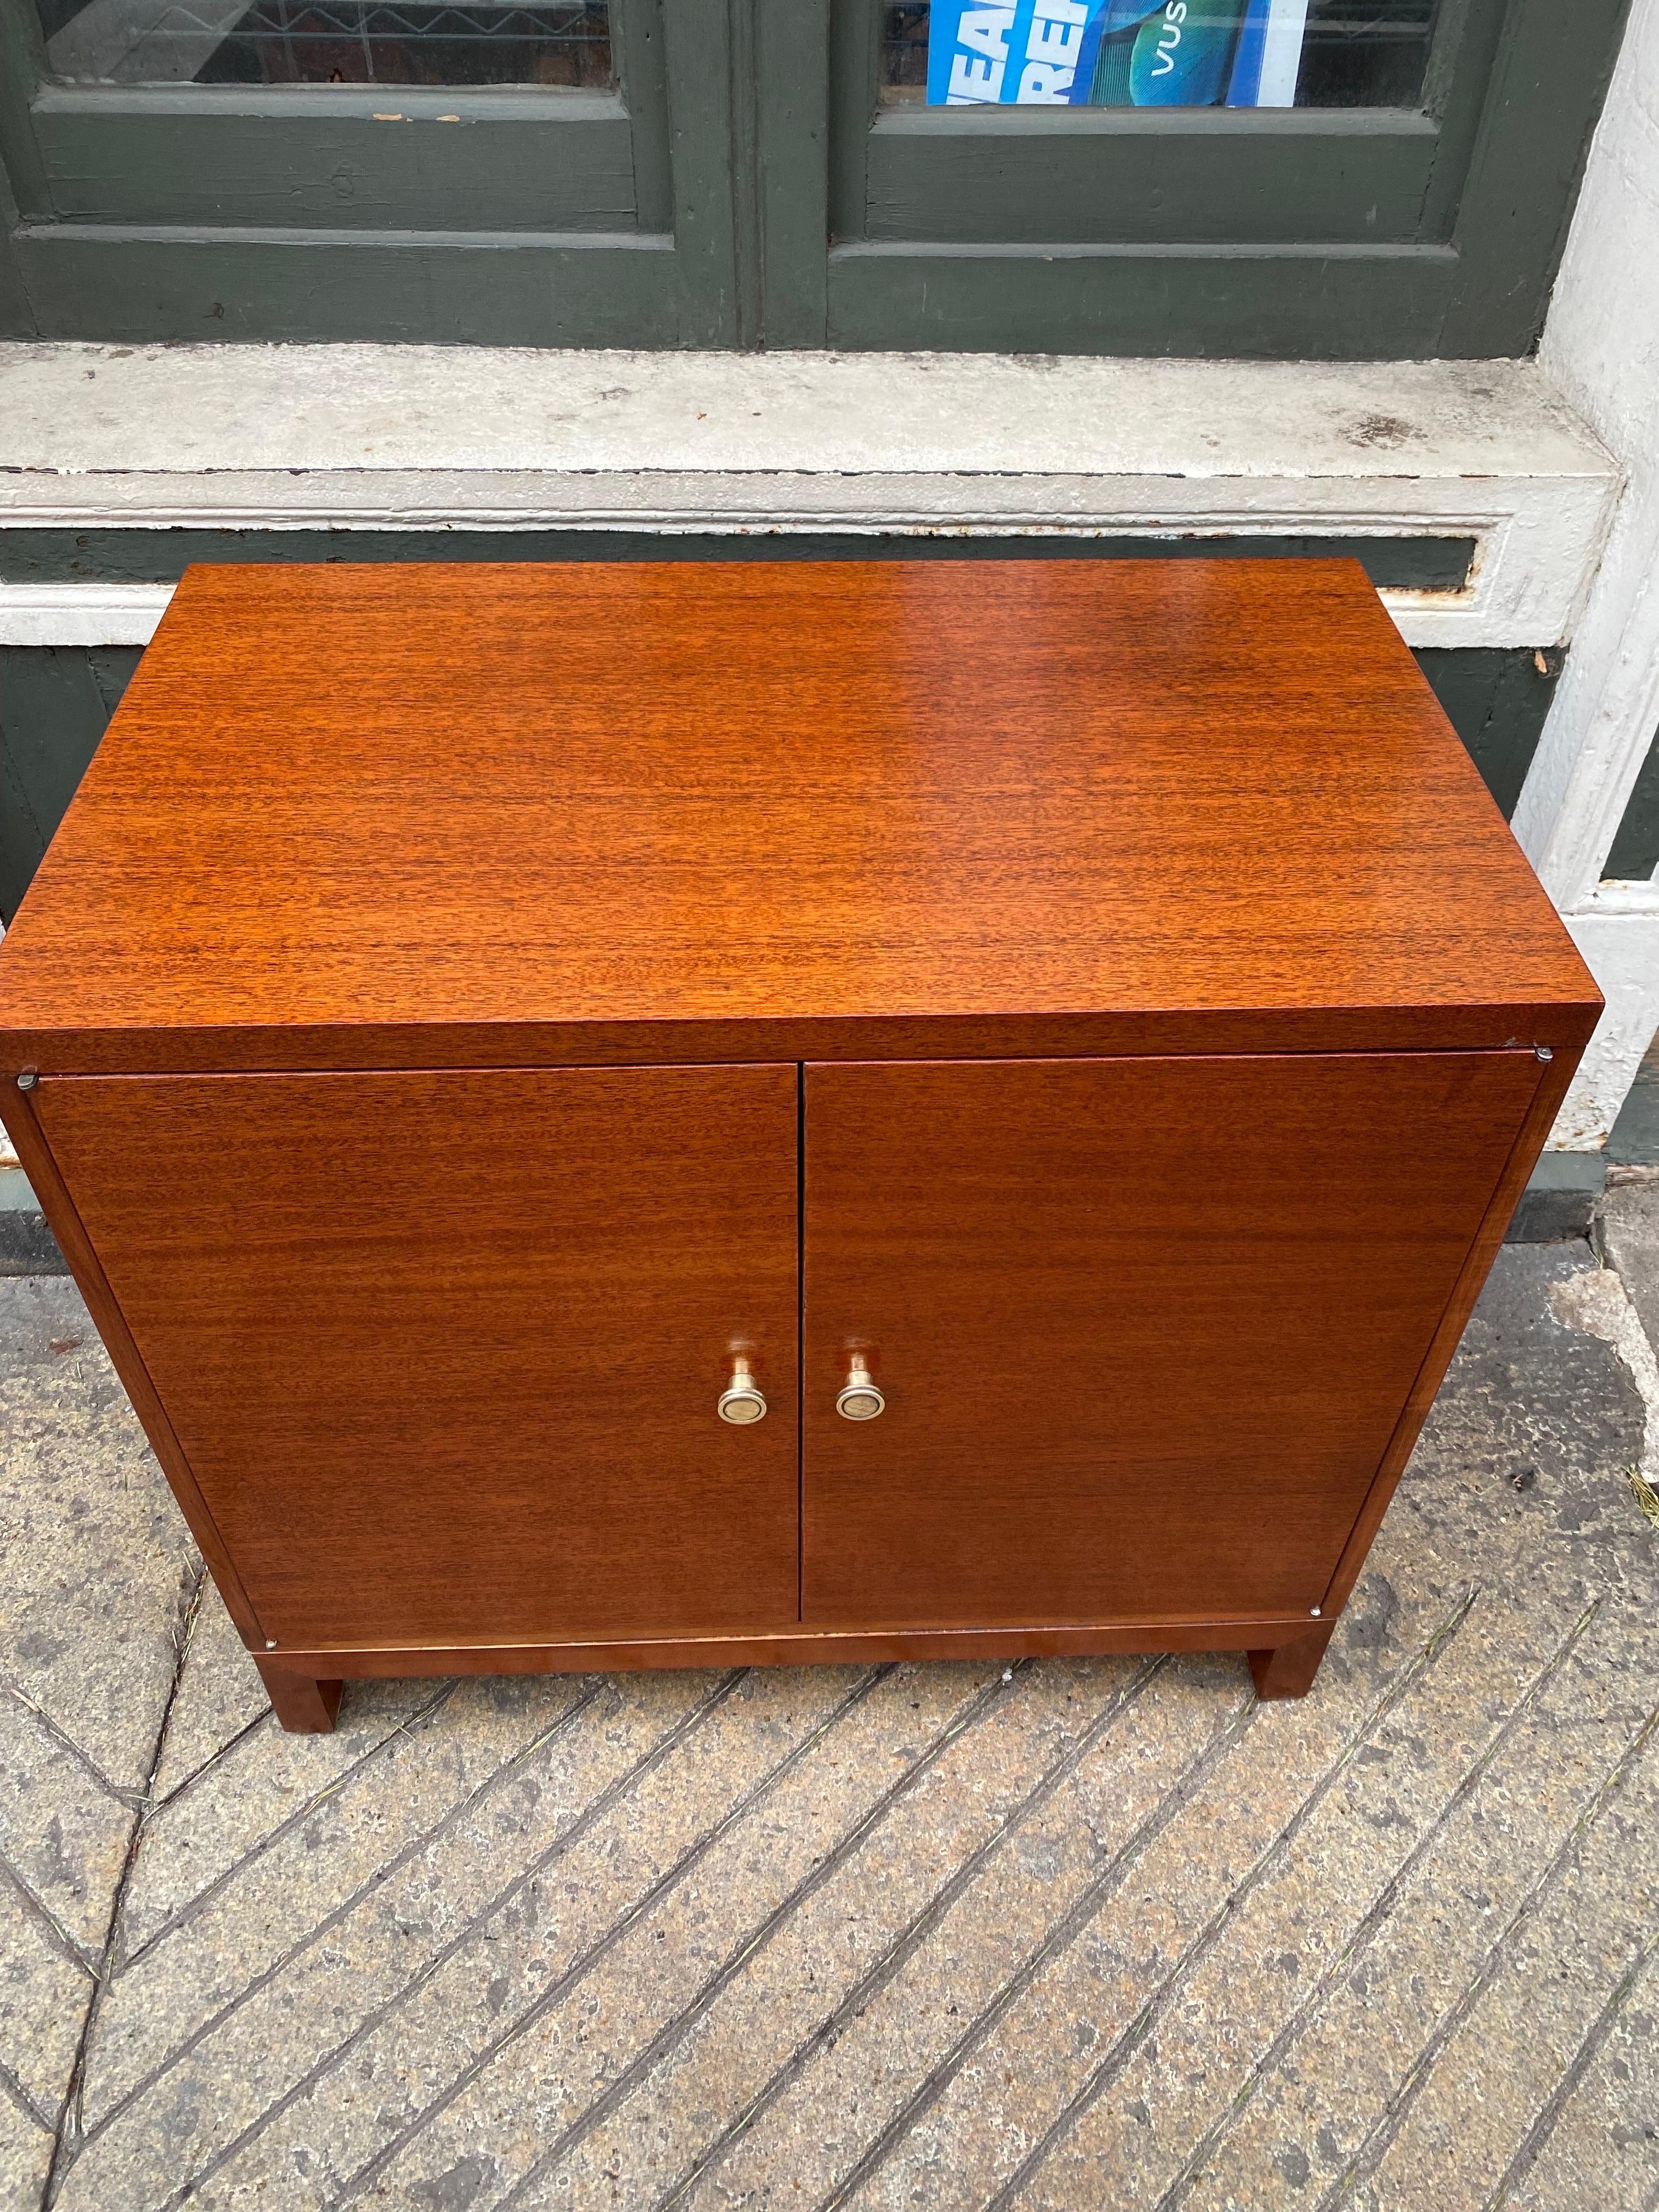 Widdicomb modern 2 door mahogany cabinet. 2 doors open to adjustable shelves. Newly refinished with original brass pulls polished! Great size perfect to use in many places in the home! Perfect as a bar cabinet or to hold a Stereo or records!